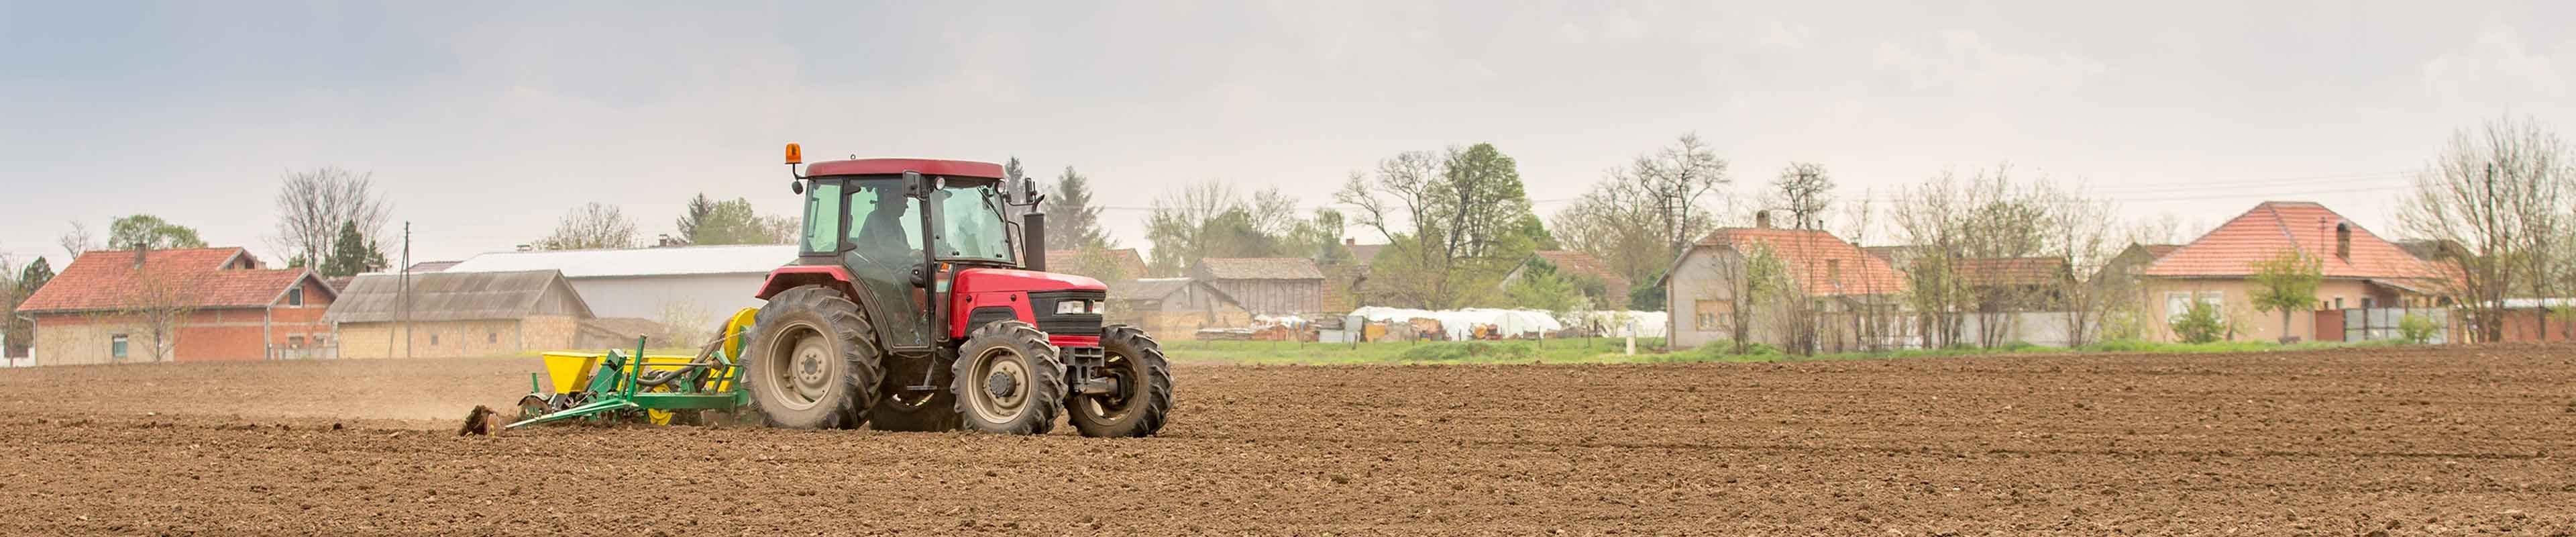 A tractor equipped with a rollover protection structure drives across a field.